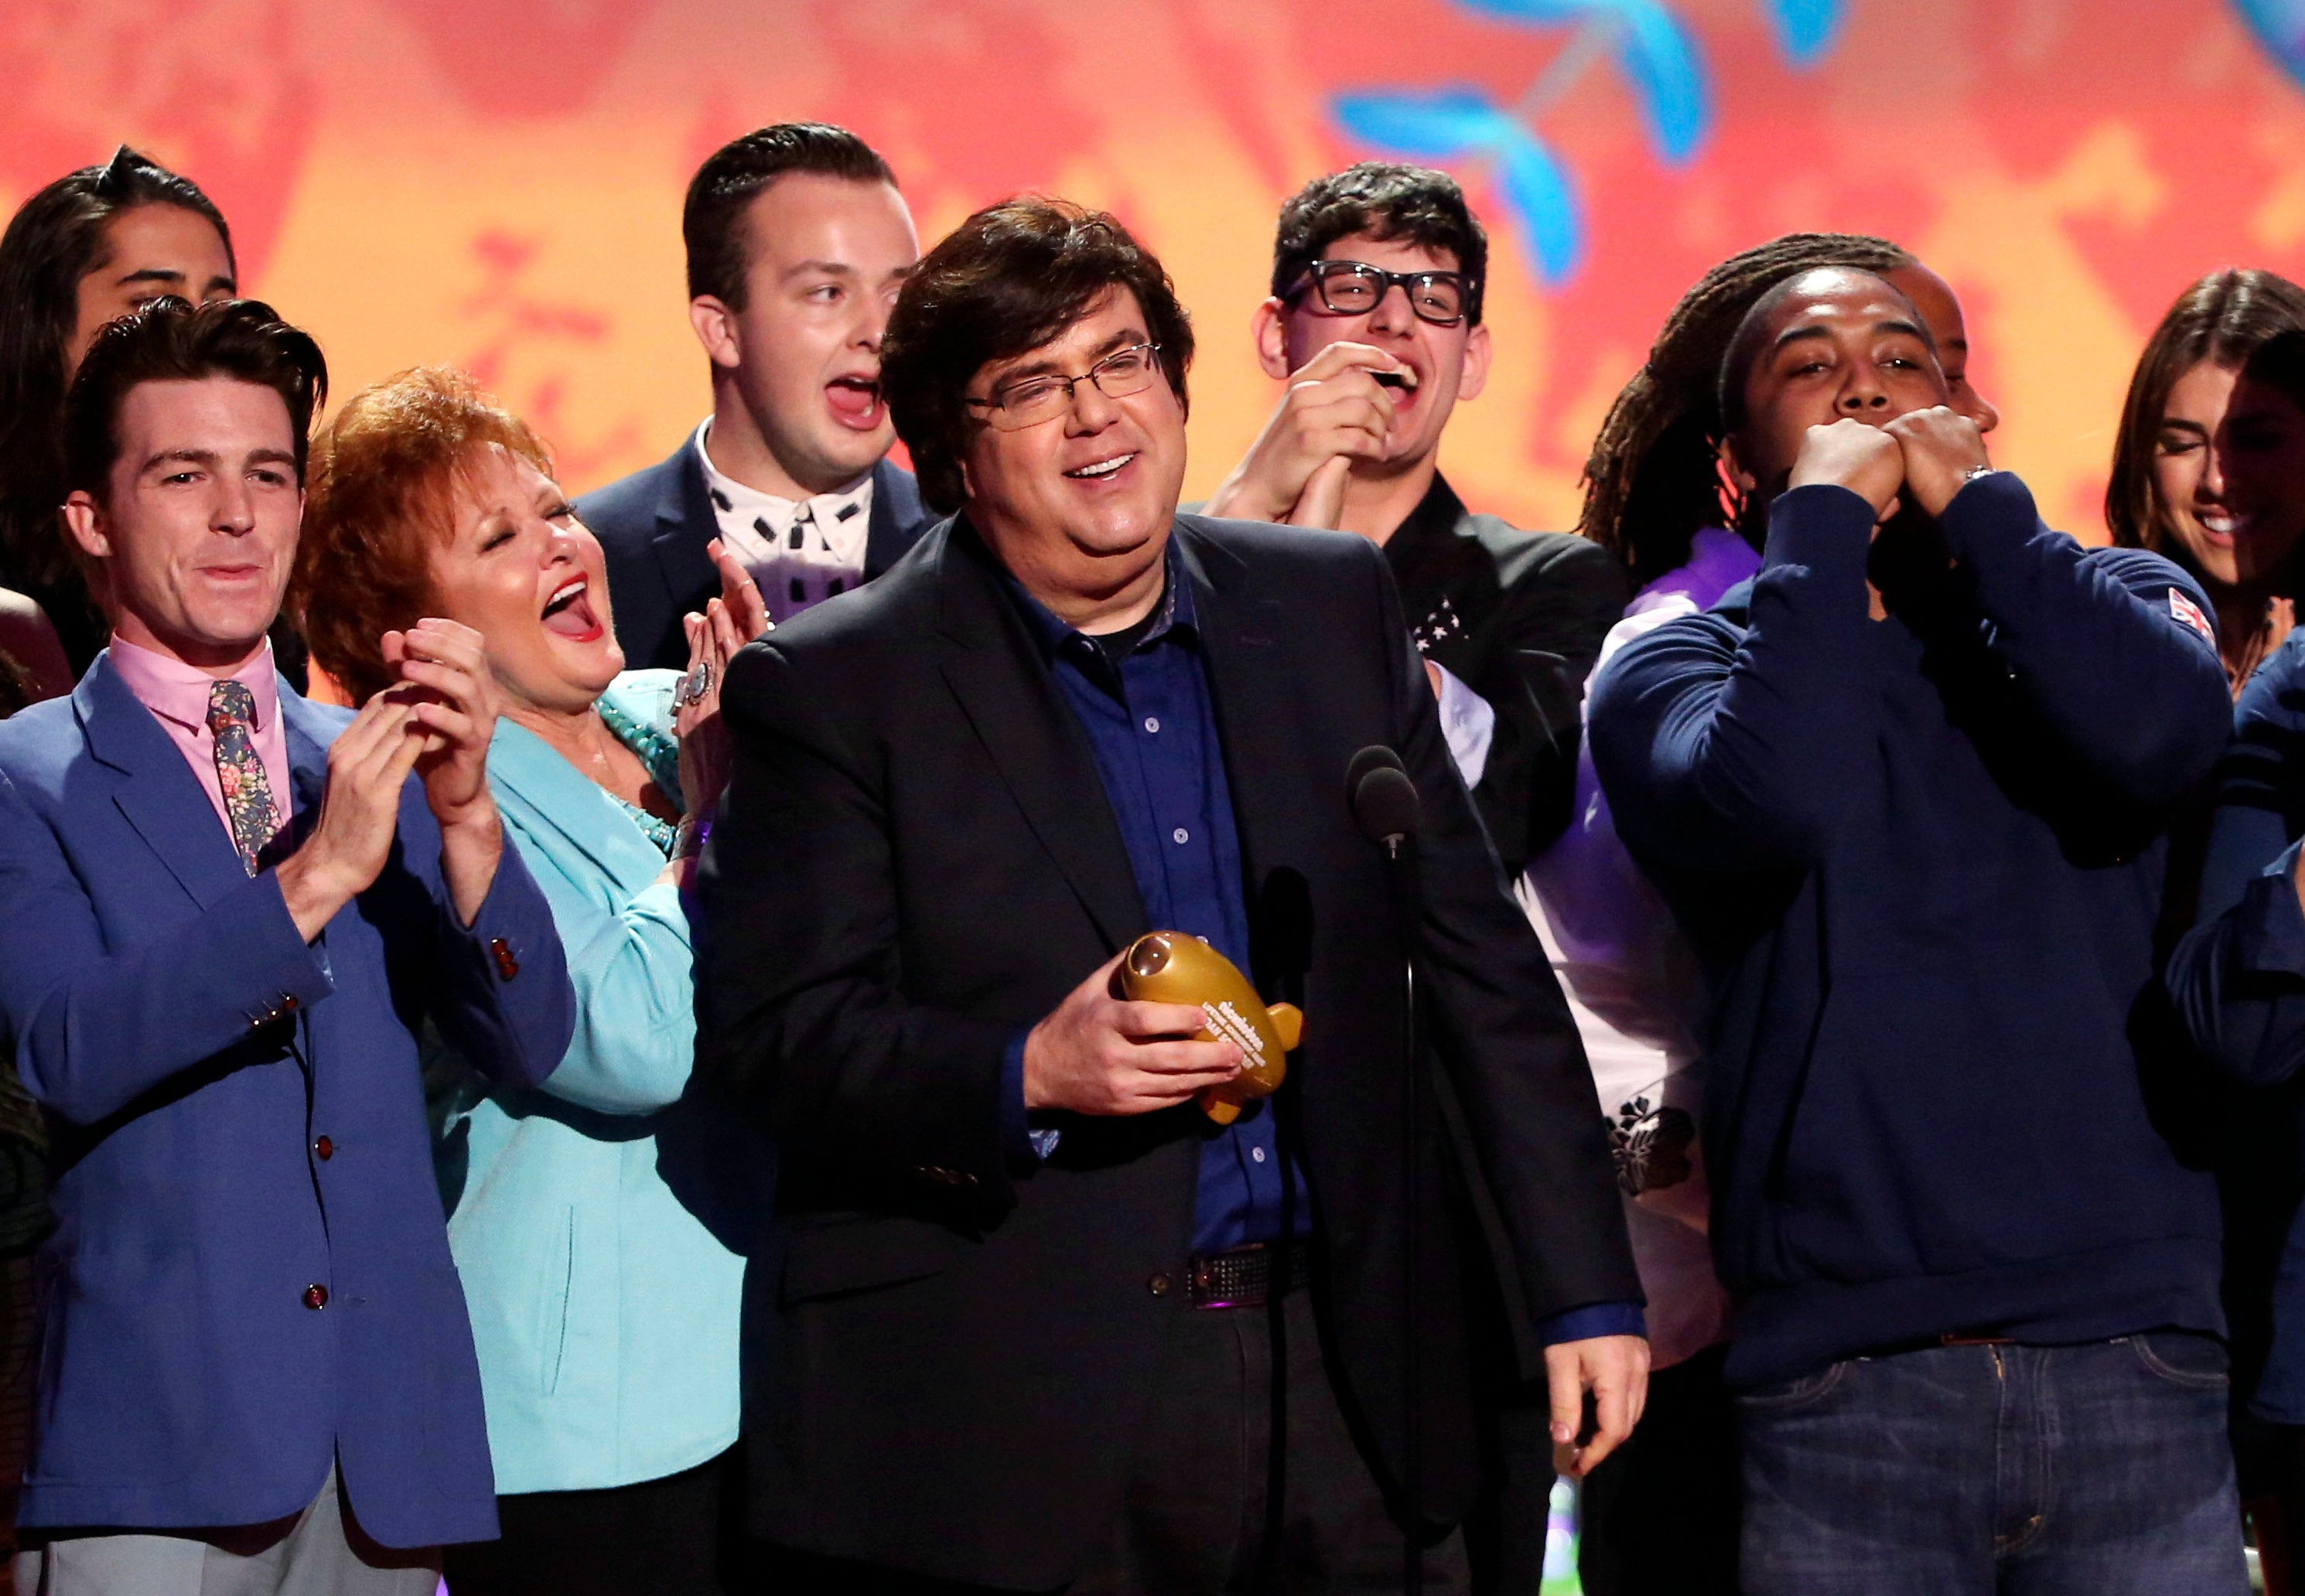 Dan Schneider, center, accepts an award in Los Angeles. He exited Nickelodeon in 2018 after an investigation determined he committed verbal abuse on set